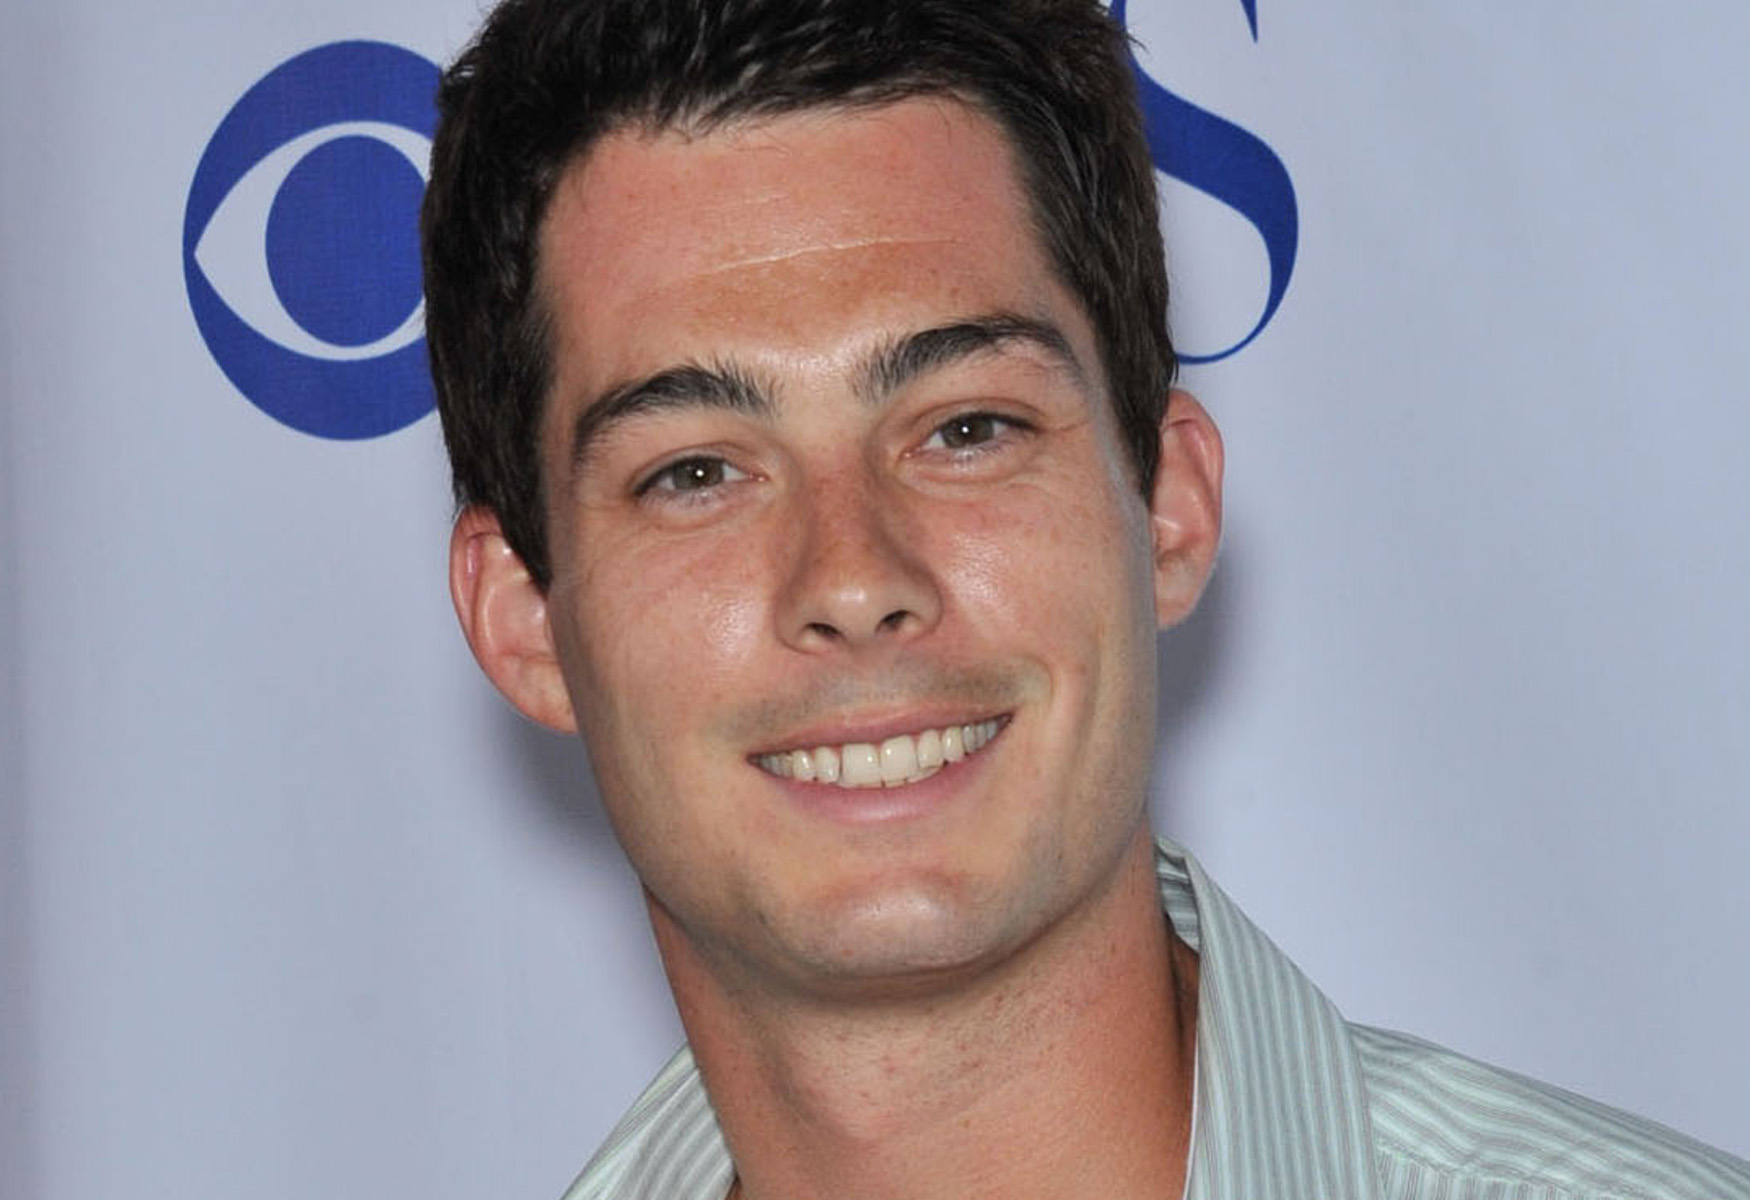 21-unbelievable-facts-about-brian-hallisay